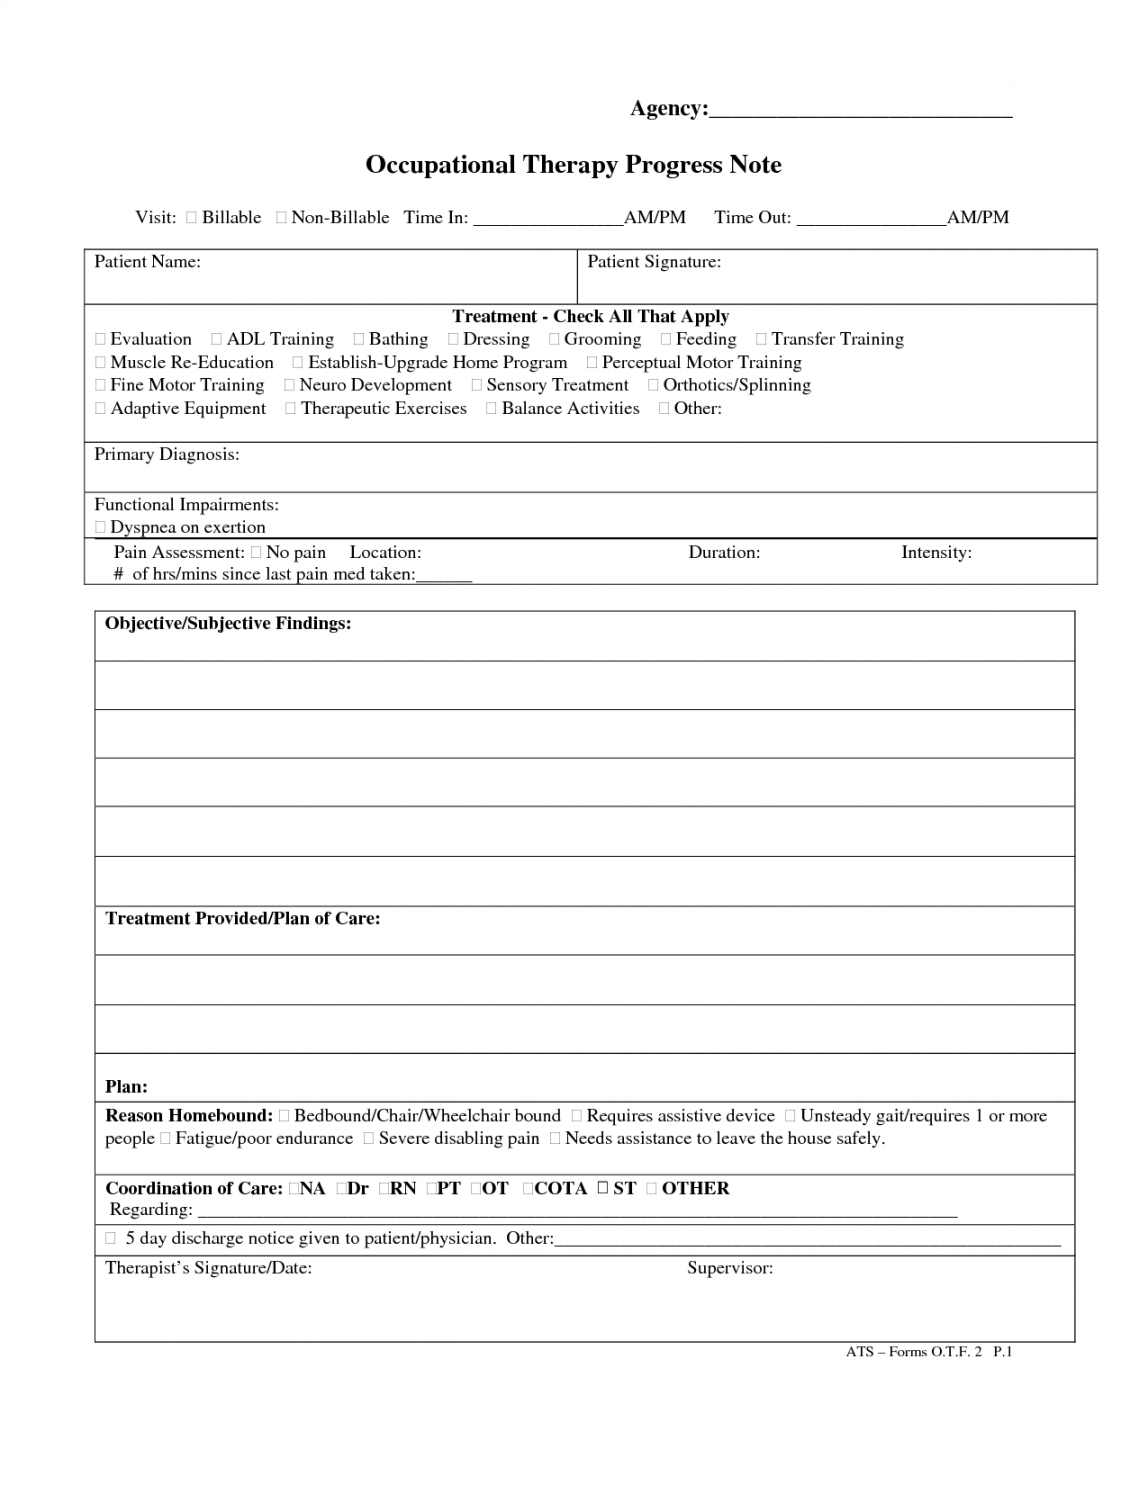 editable tenncare occupational therapy templates  occupational occupational therapy progress note template word